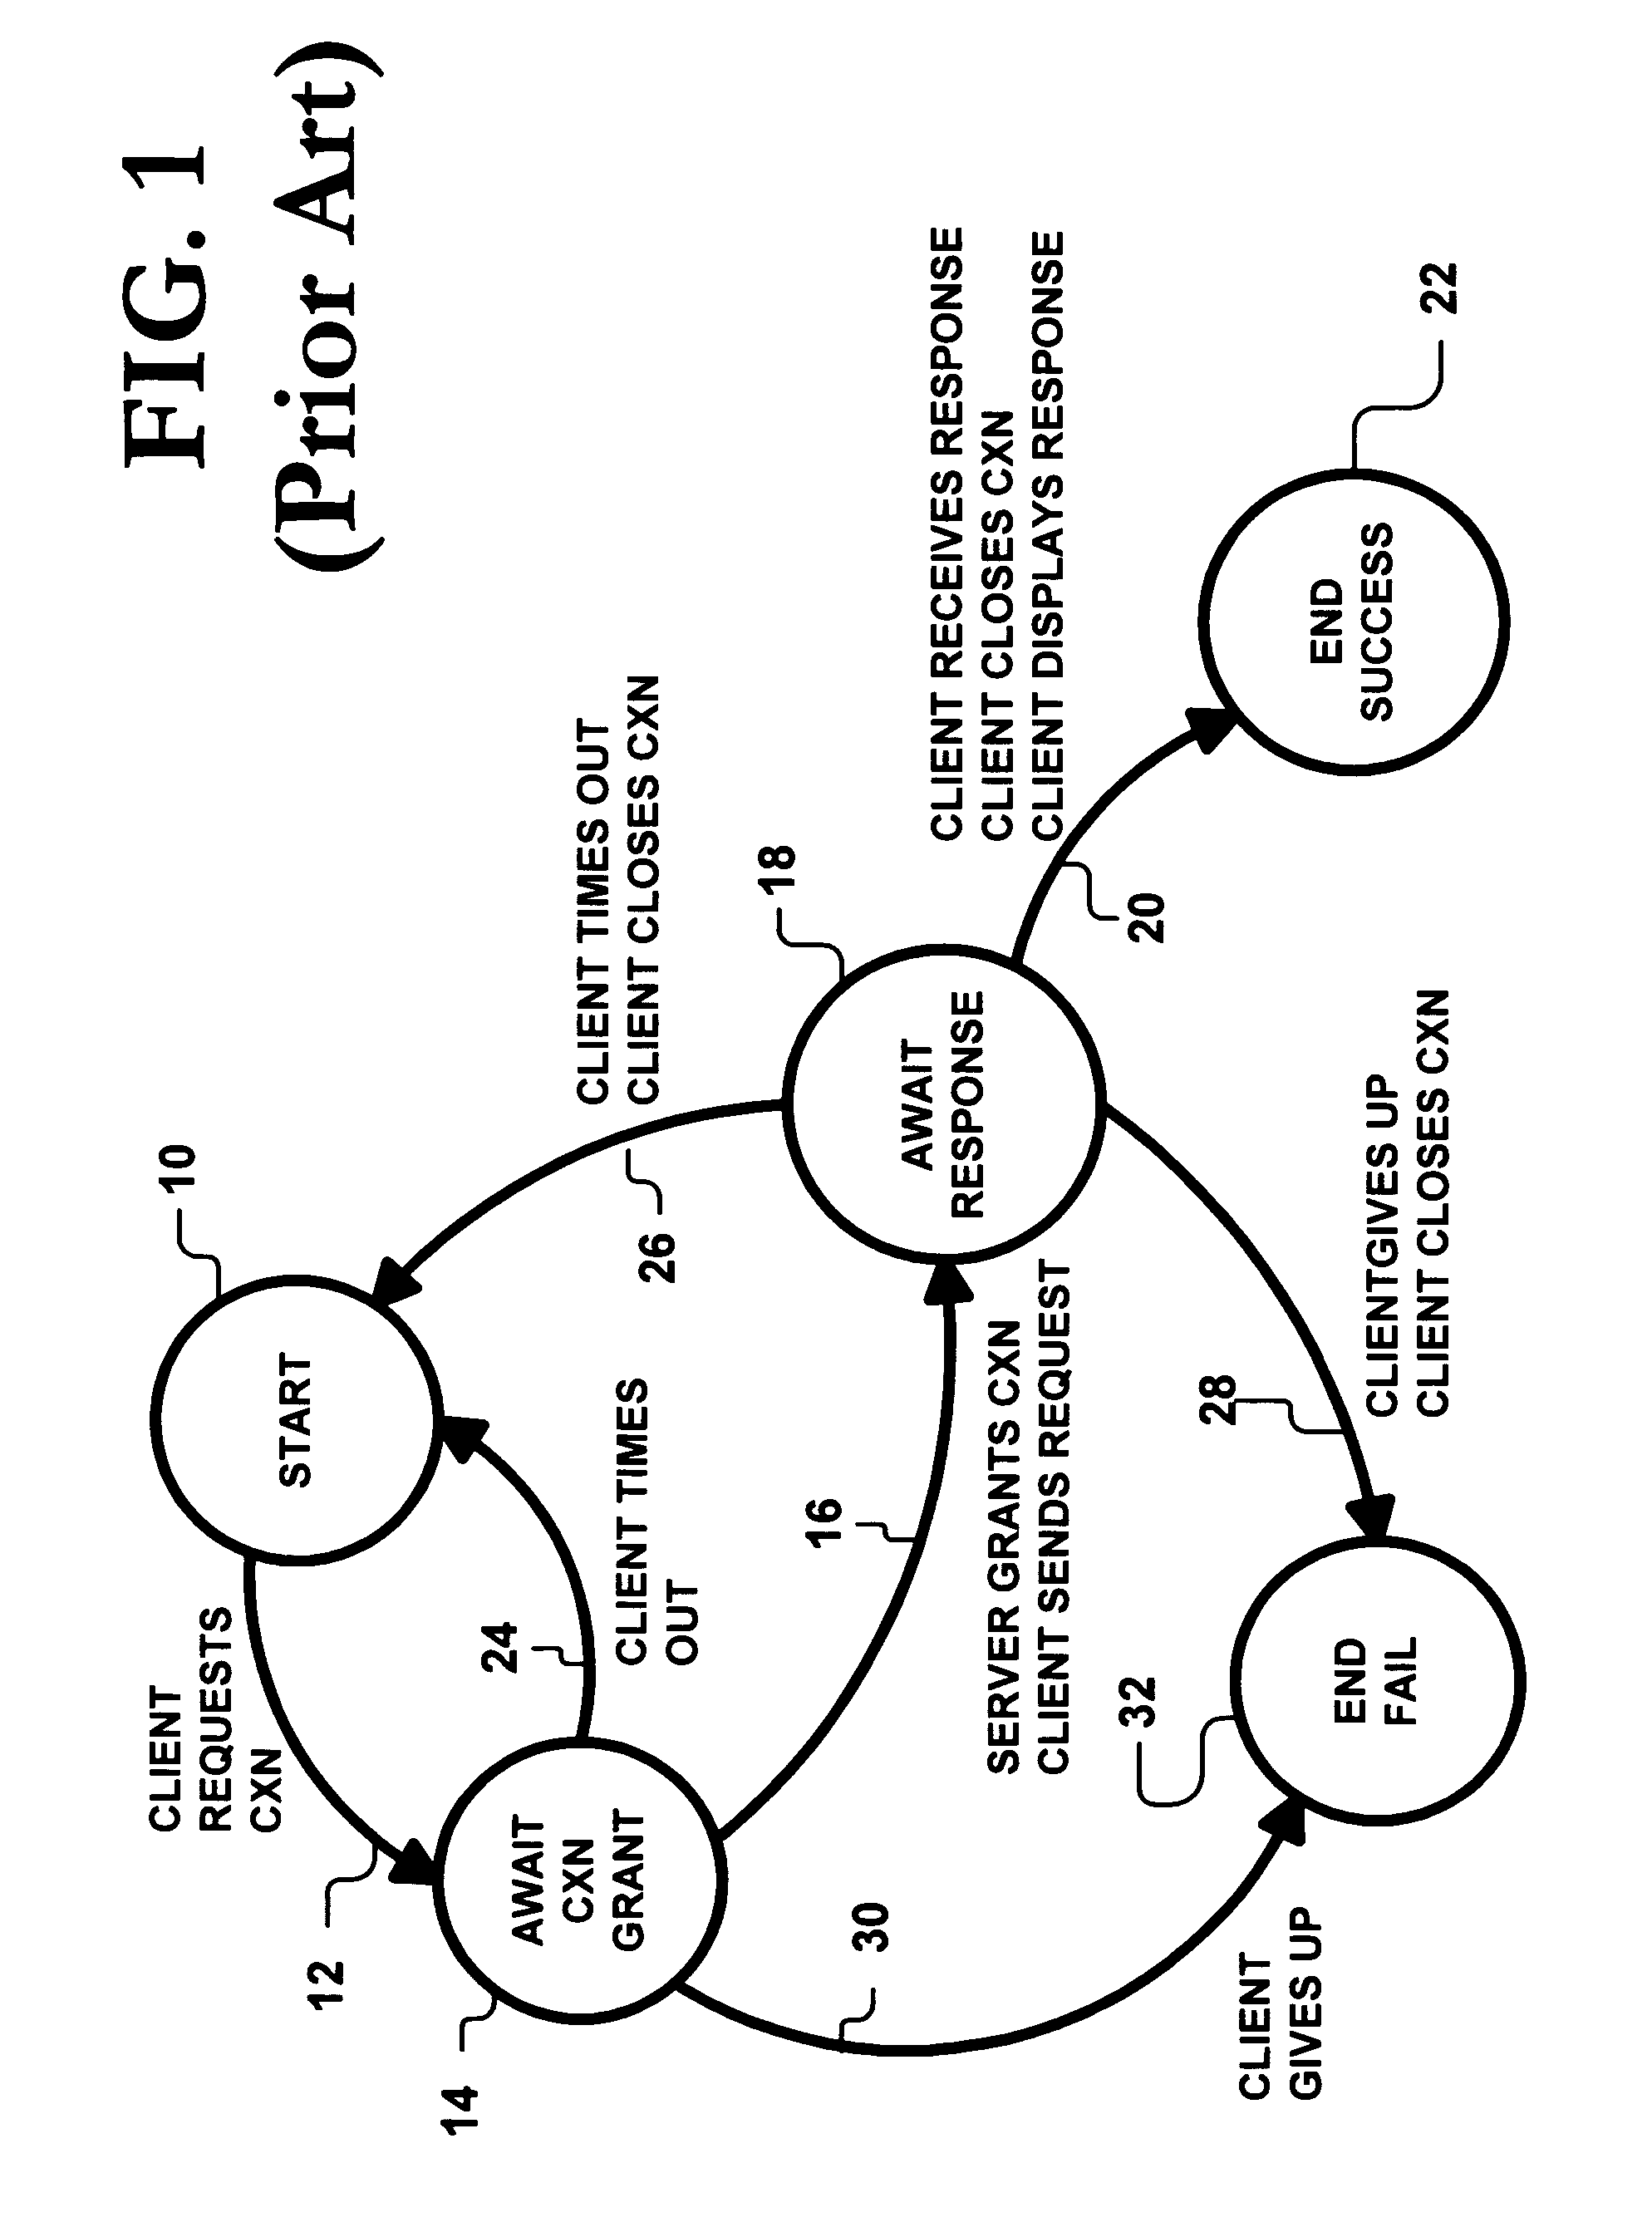 System for aborting response to client request if detecting connection between client server is closed by examining local server information